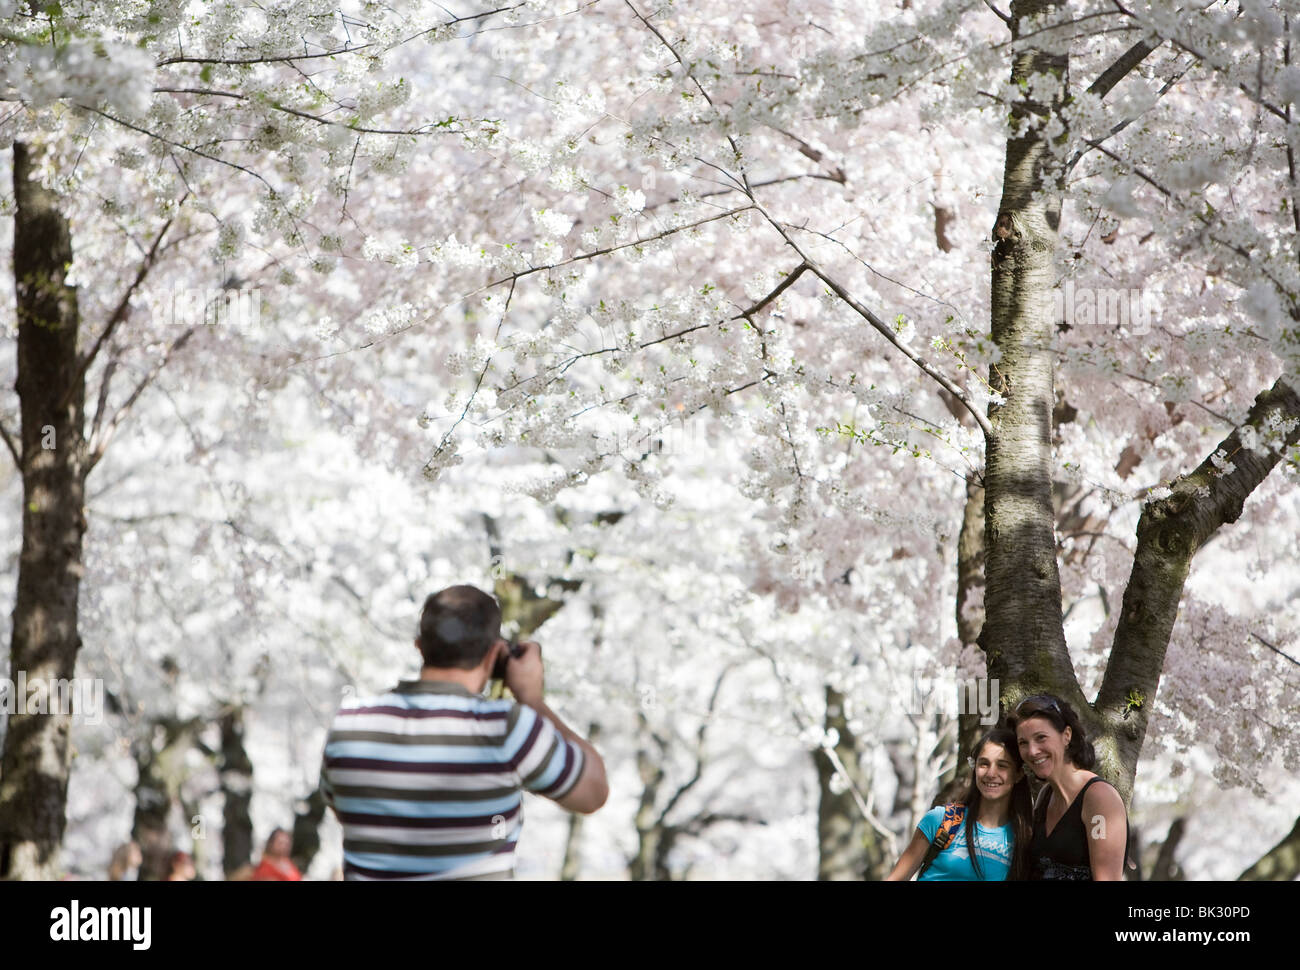 The Cherry Blossoms in Washington, DC. Stock Photo